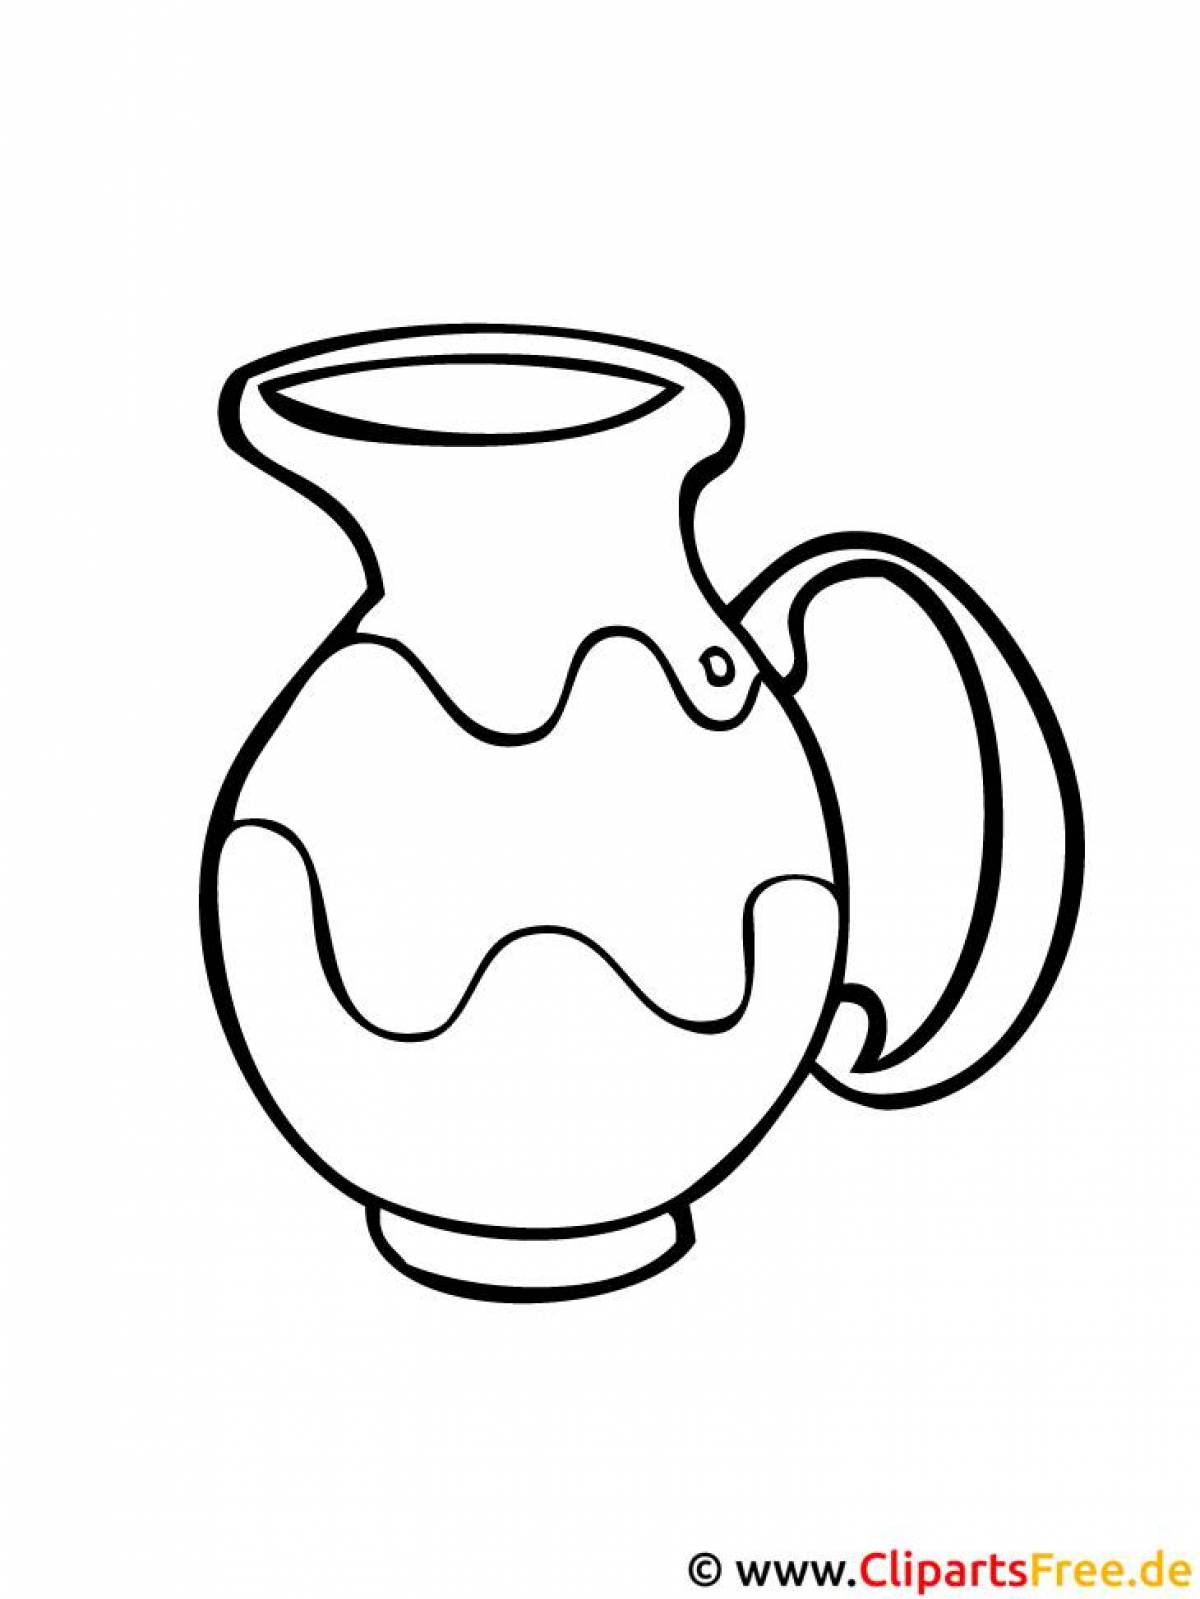 Great pitcher coloring page